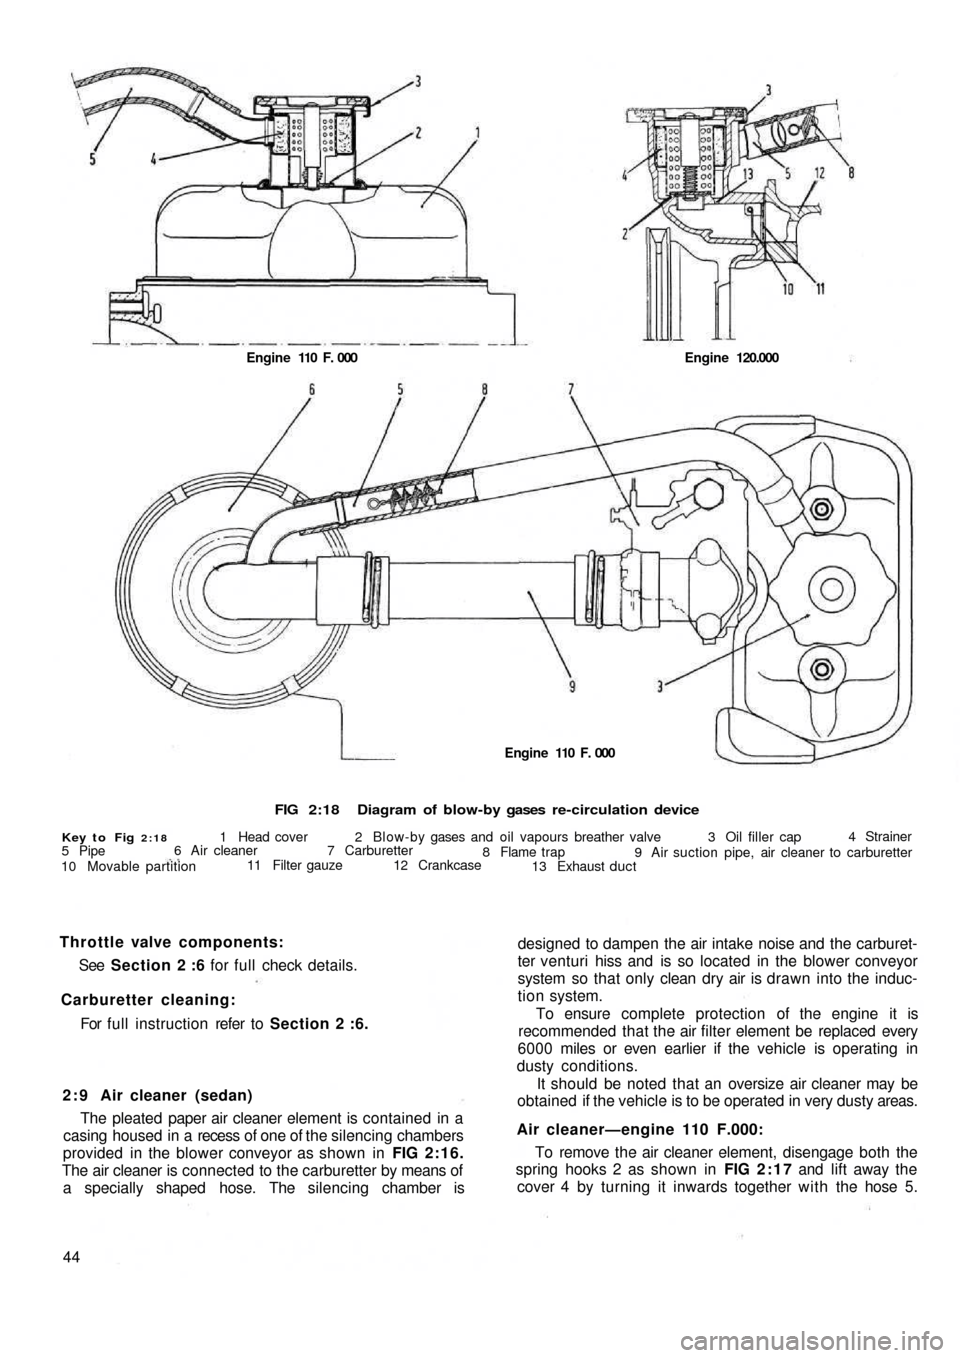 FIAT 500 1959 1.G Owners Guide FIG 2:18Diagram of blow-by gases  re-circulation device
Key to Fig 2:181 Head cover 2 Blow-by gases and  oil vapours breather valve 3 Oil filler cap4 Strainer
9 Air suction pipe, air cleaner to carbur